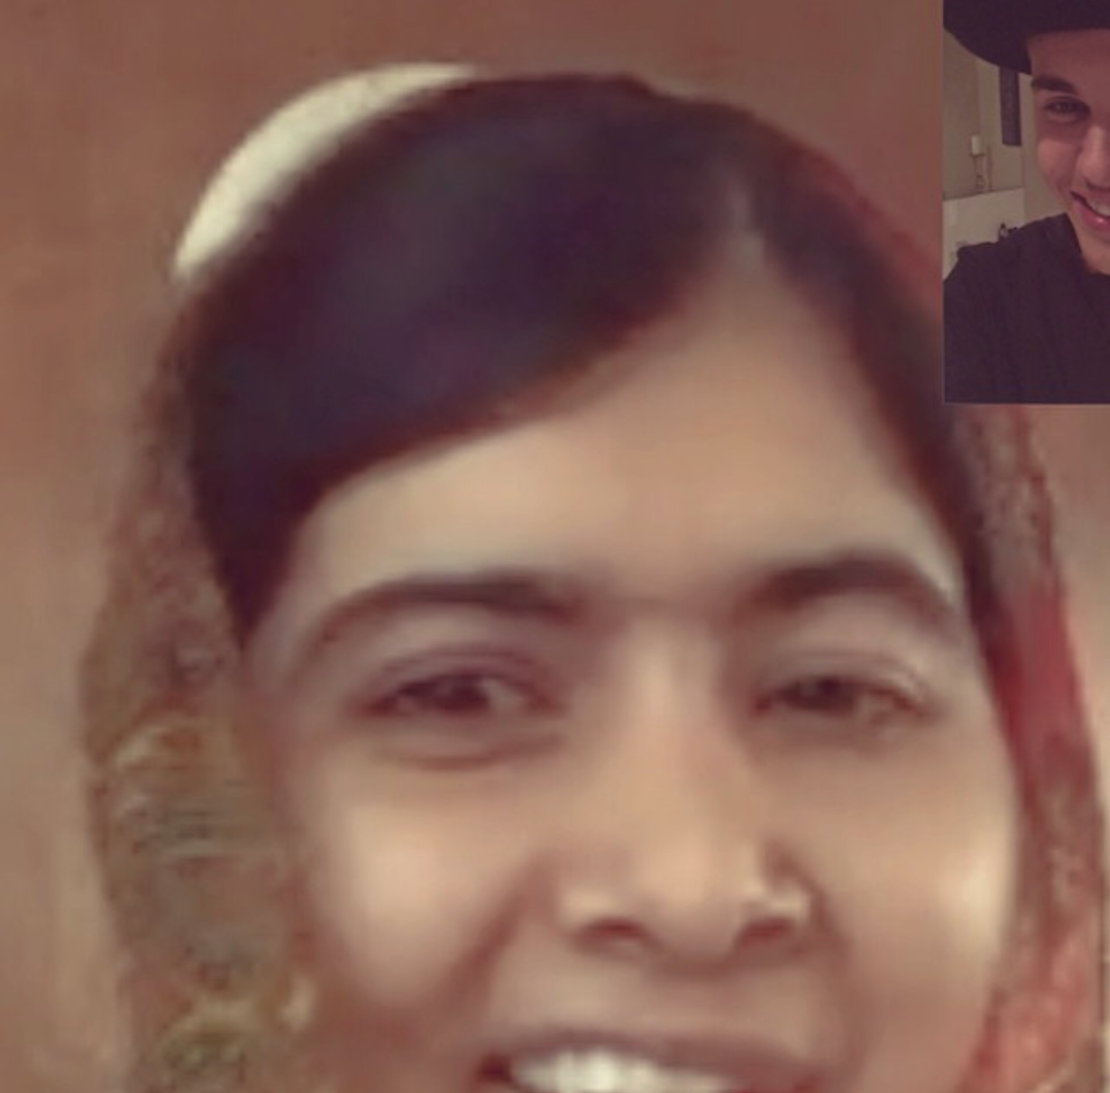 Justin Bieber posts sceenshot on Instagram of his FaceTime with Malala Yousafzai.